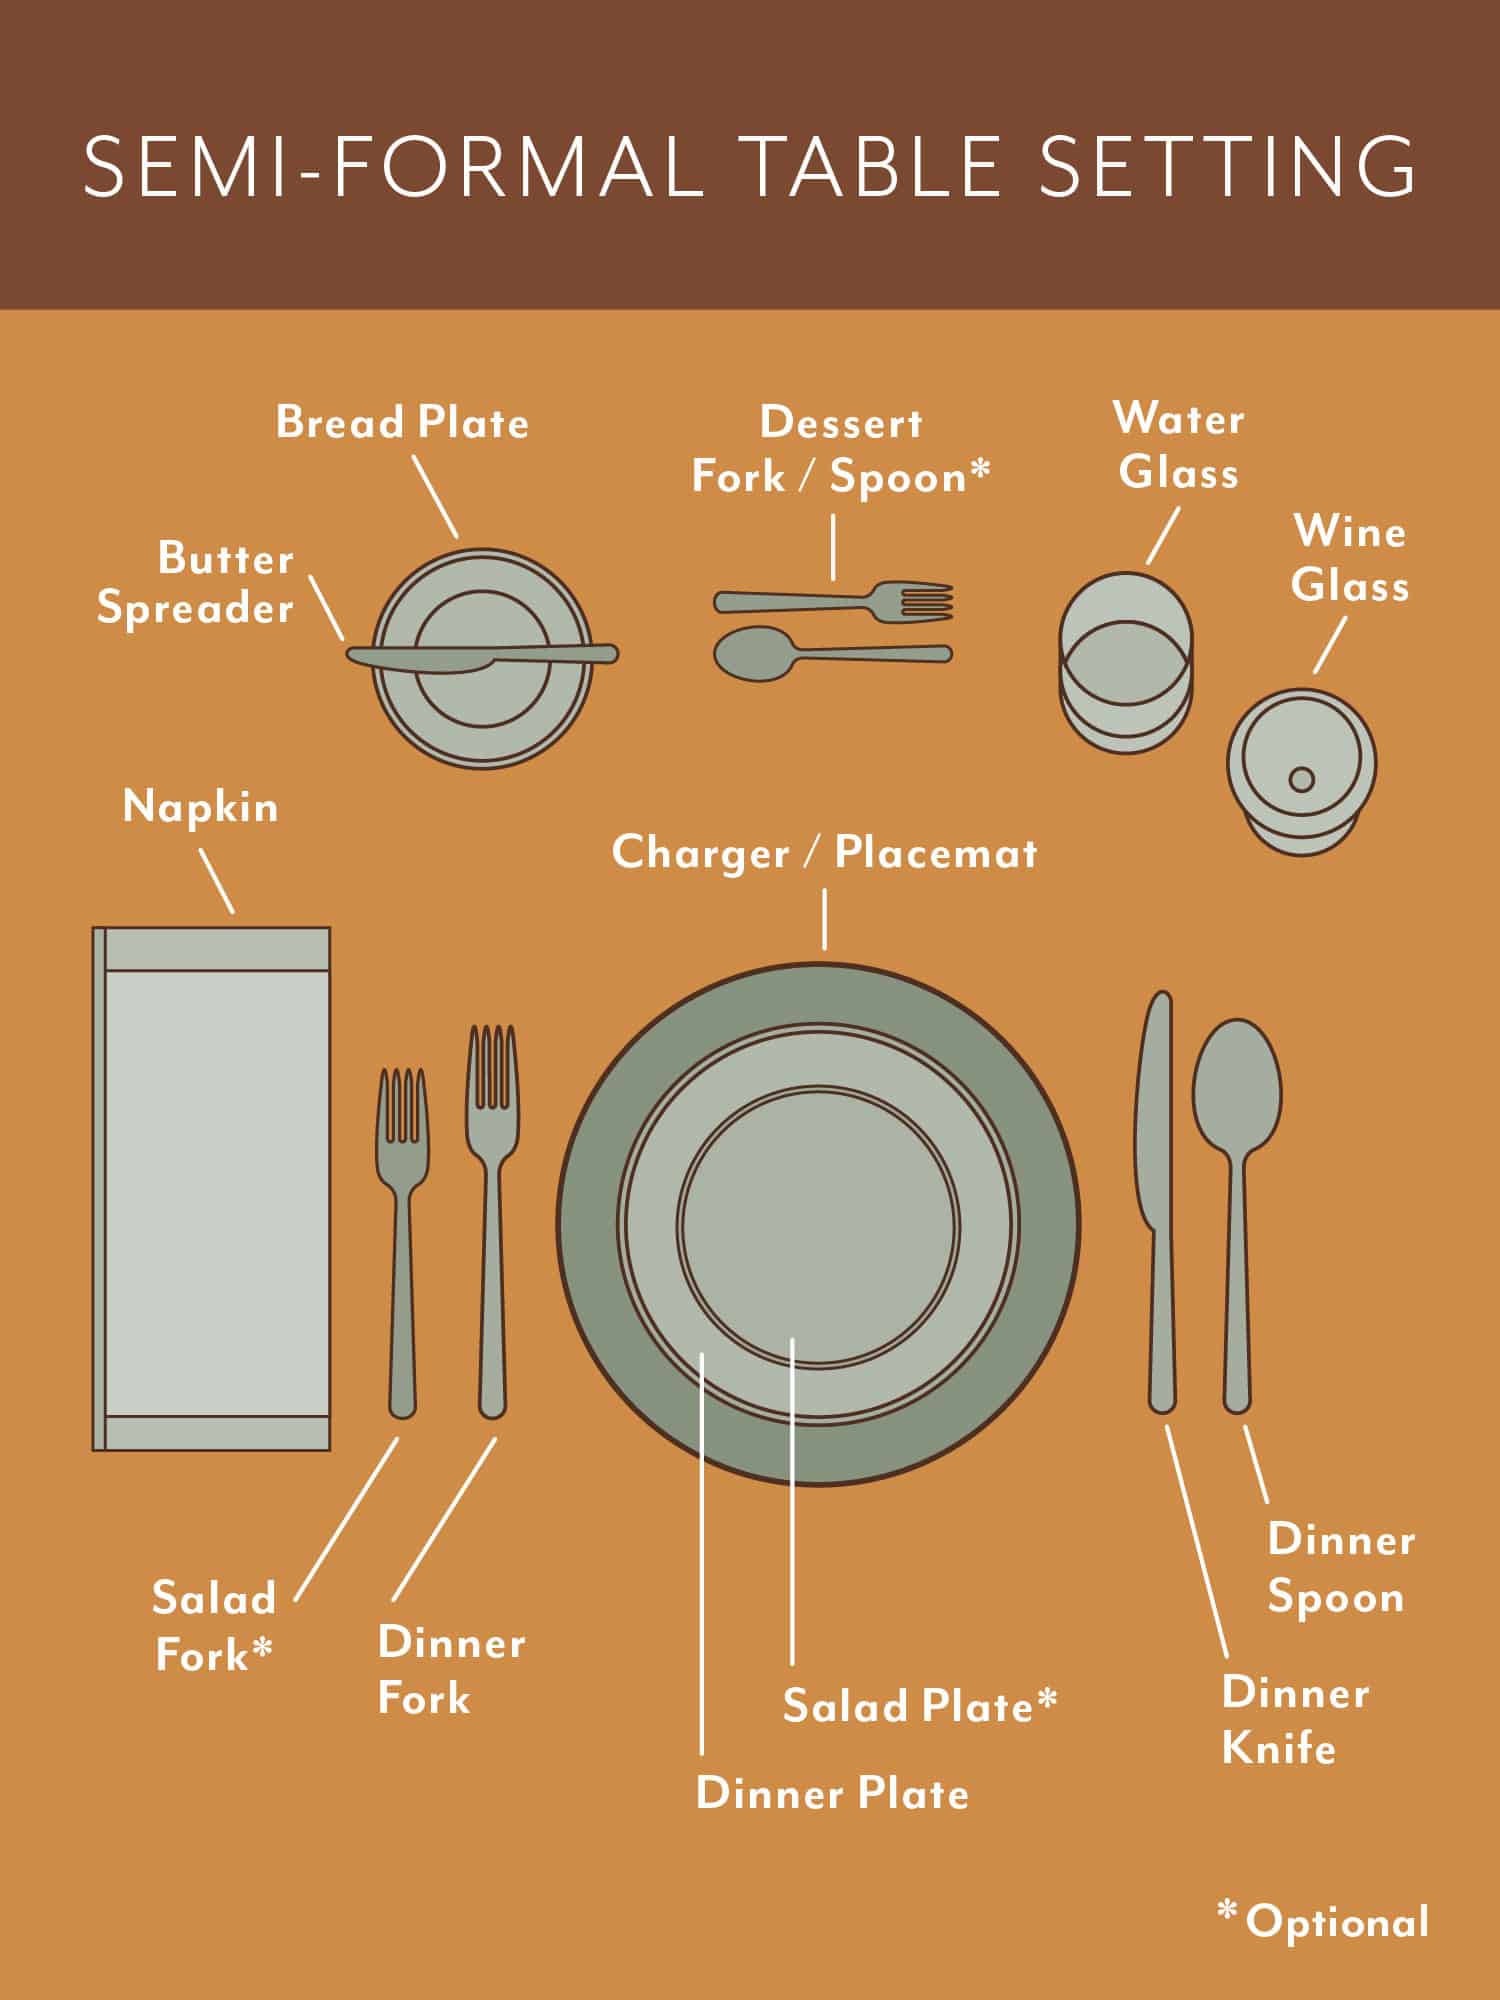 How to set a semi-formal Thanksgiving table